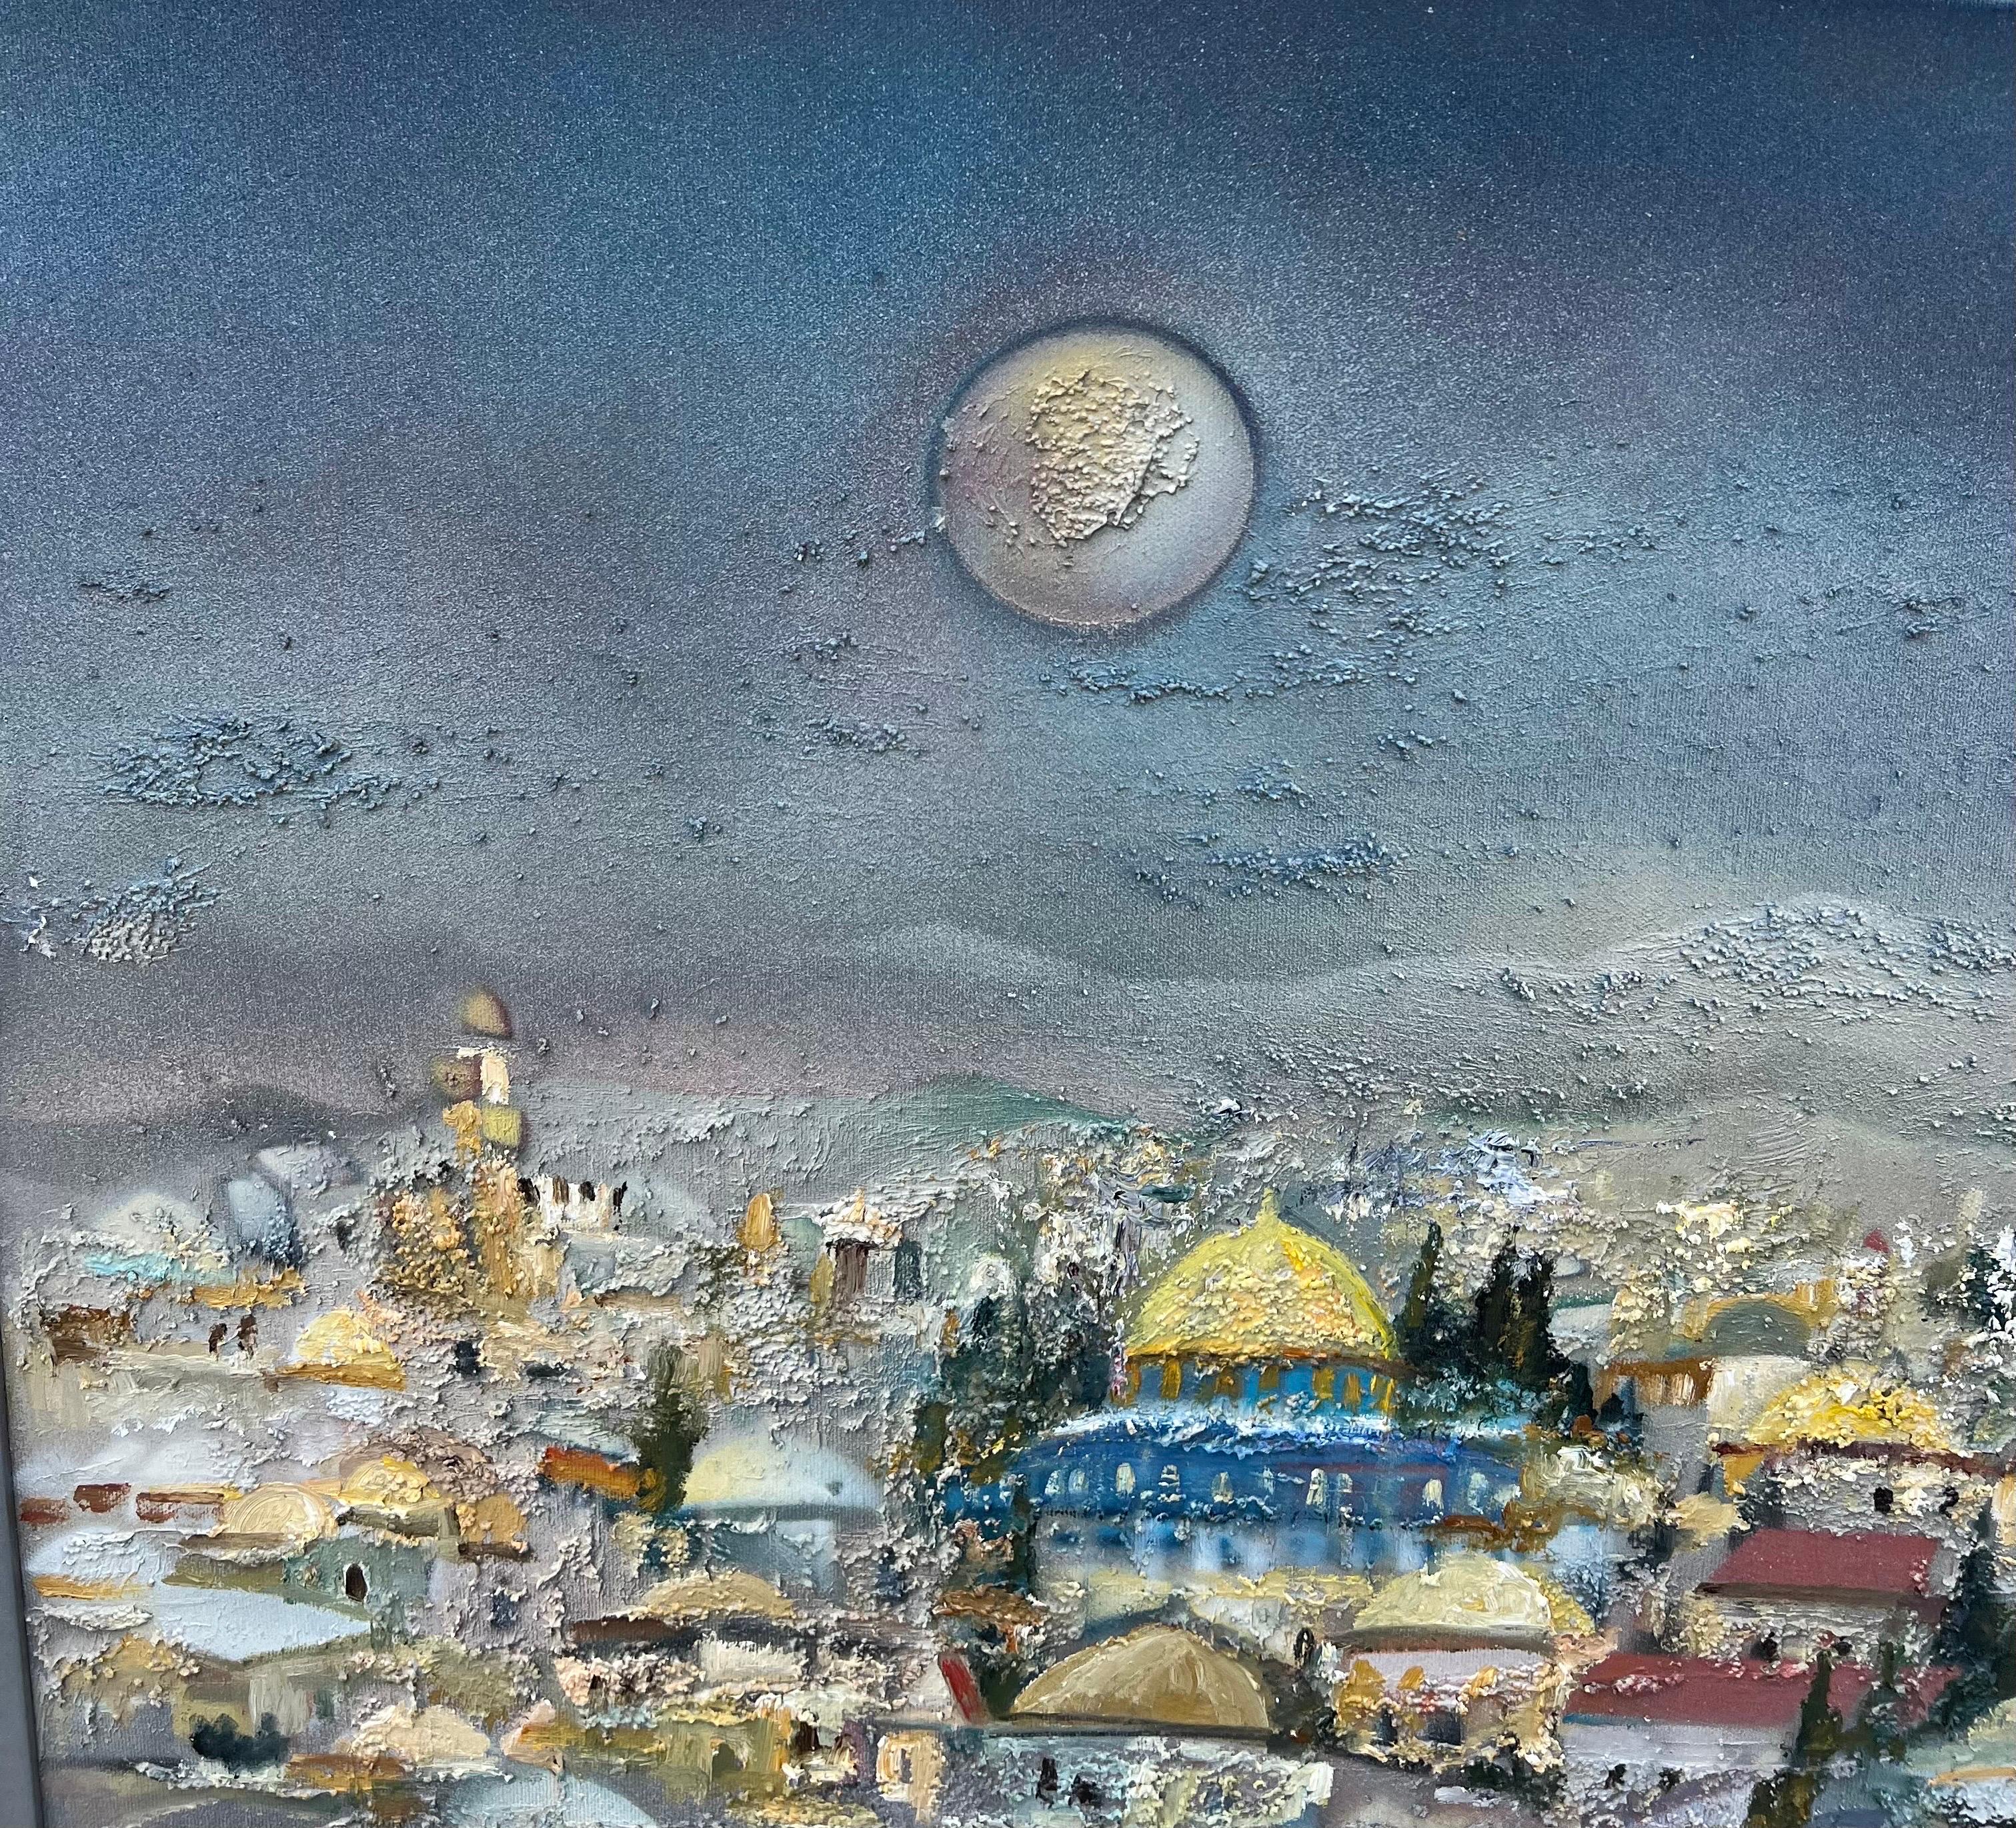 Jerusalem Israeli landscape cityscape with the Har Habayit, The Temple Mount.
Size includes frame. canvas is 37.5 X 42.5

Edward Ben Avram (born 1941) is an Indian - Israeli artist who was born in Bombay, India and immigrated to Israel as a